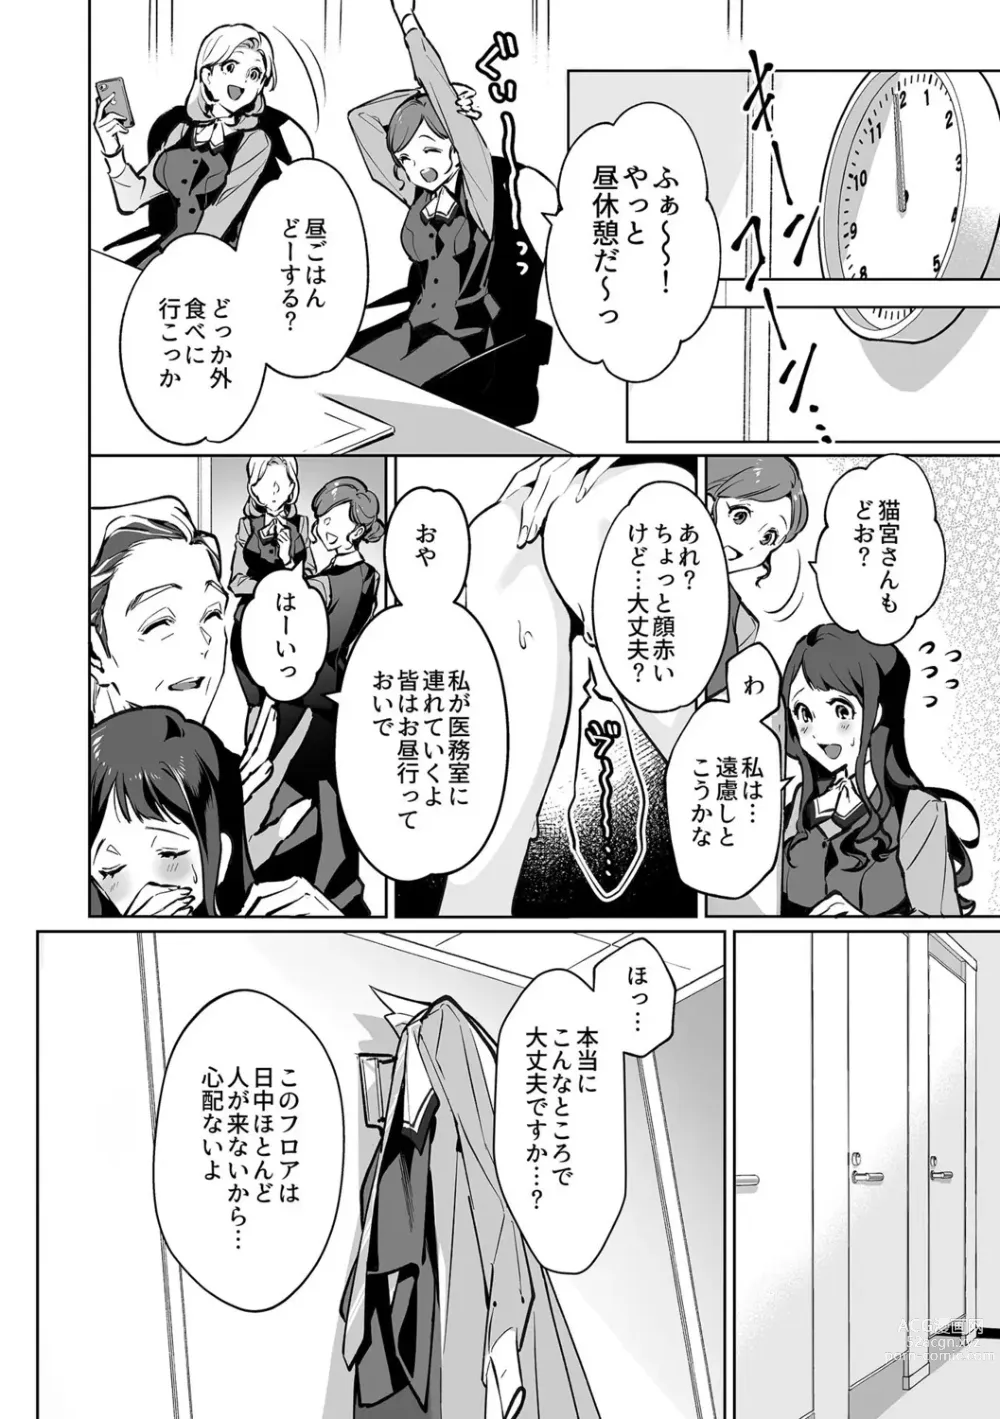 Page 8 of manga Marias Promise Master-servant relationship between me and my boss